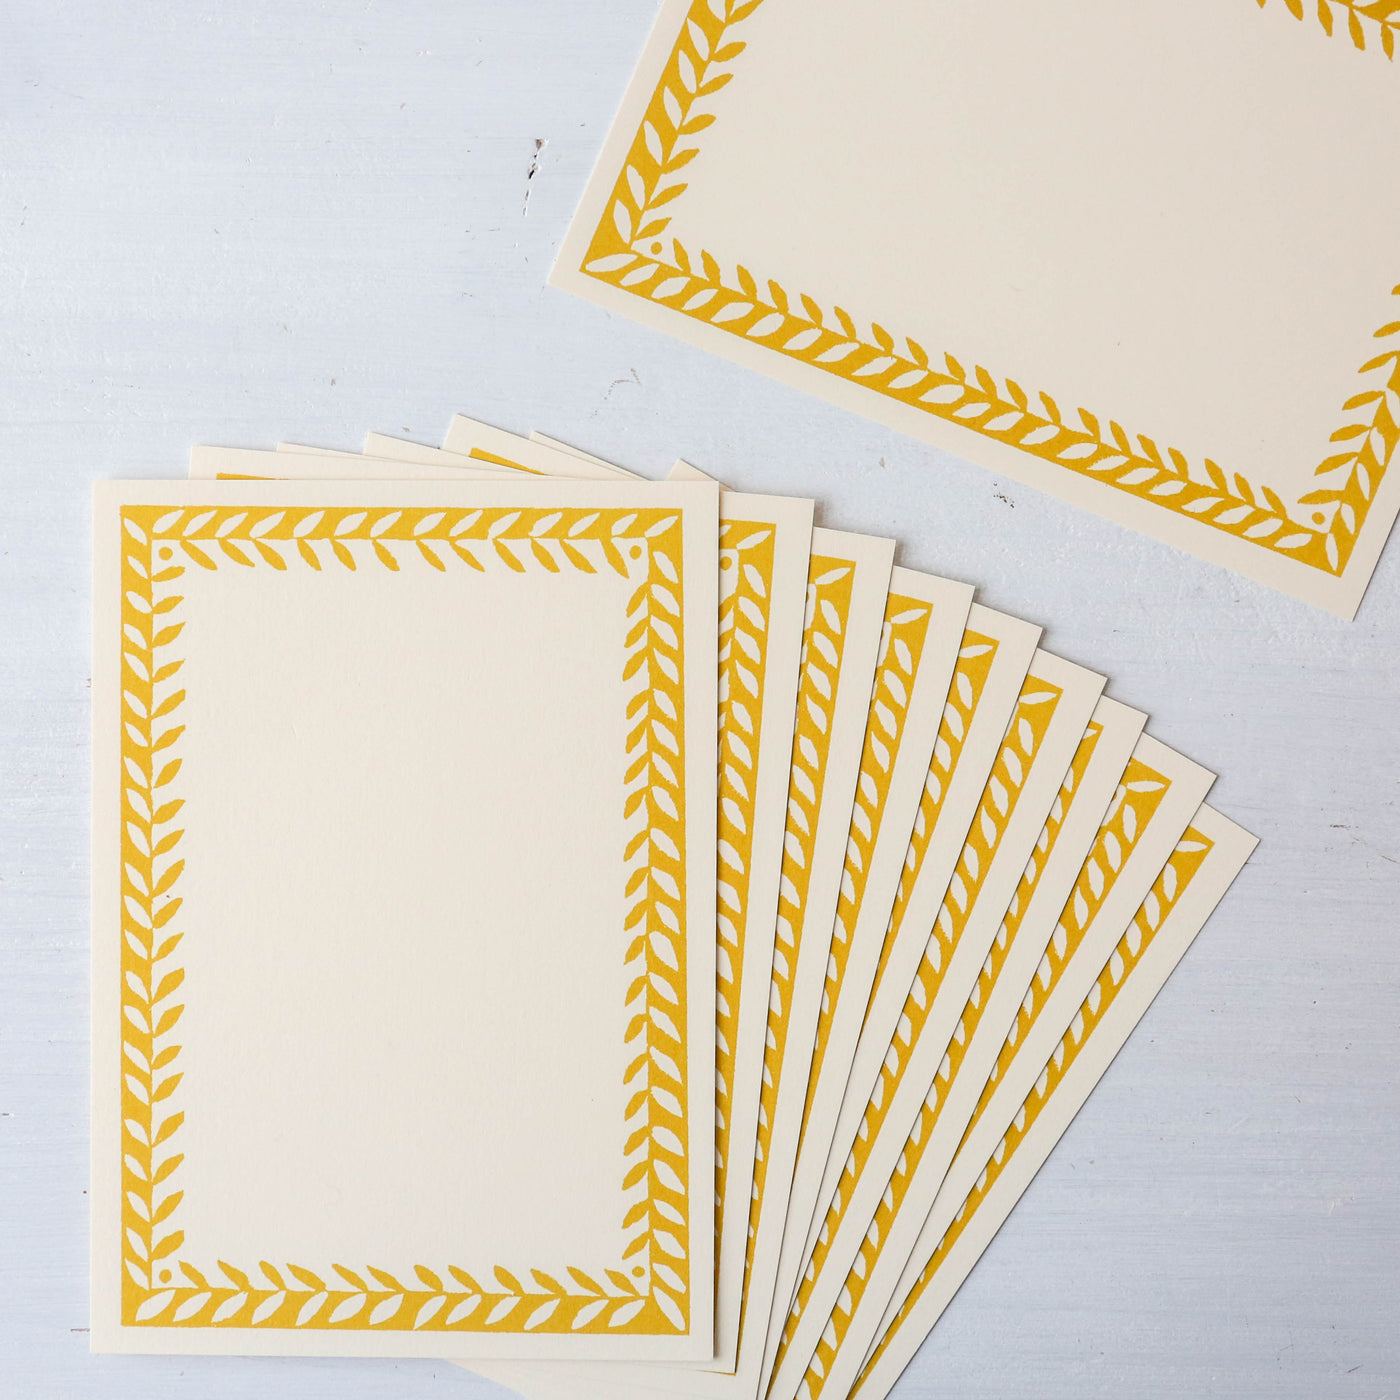 10 Postcards Cards With A Patterned Border